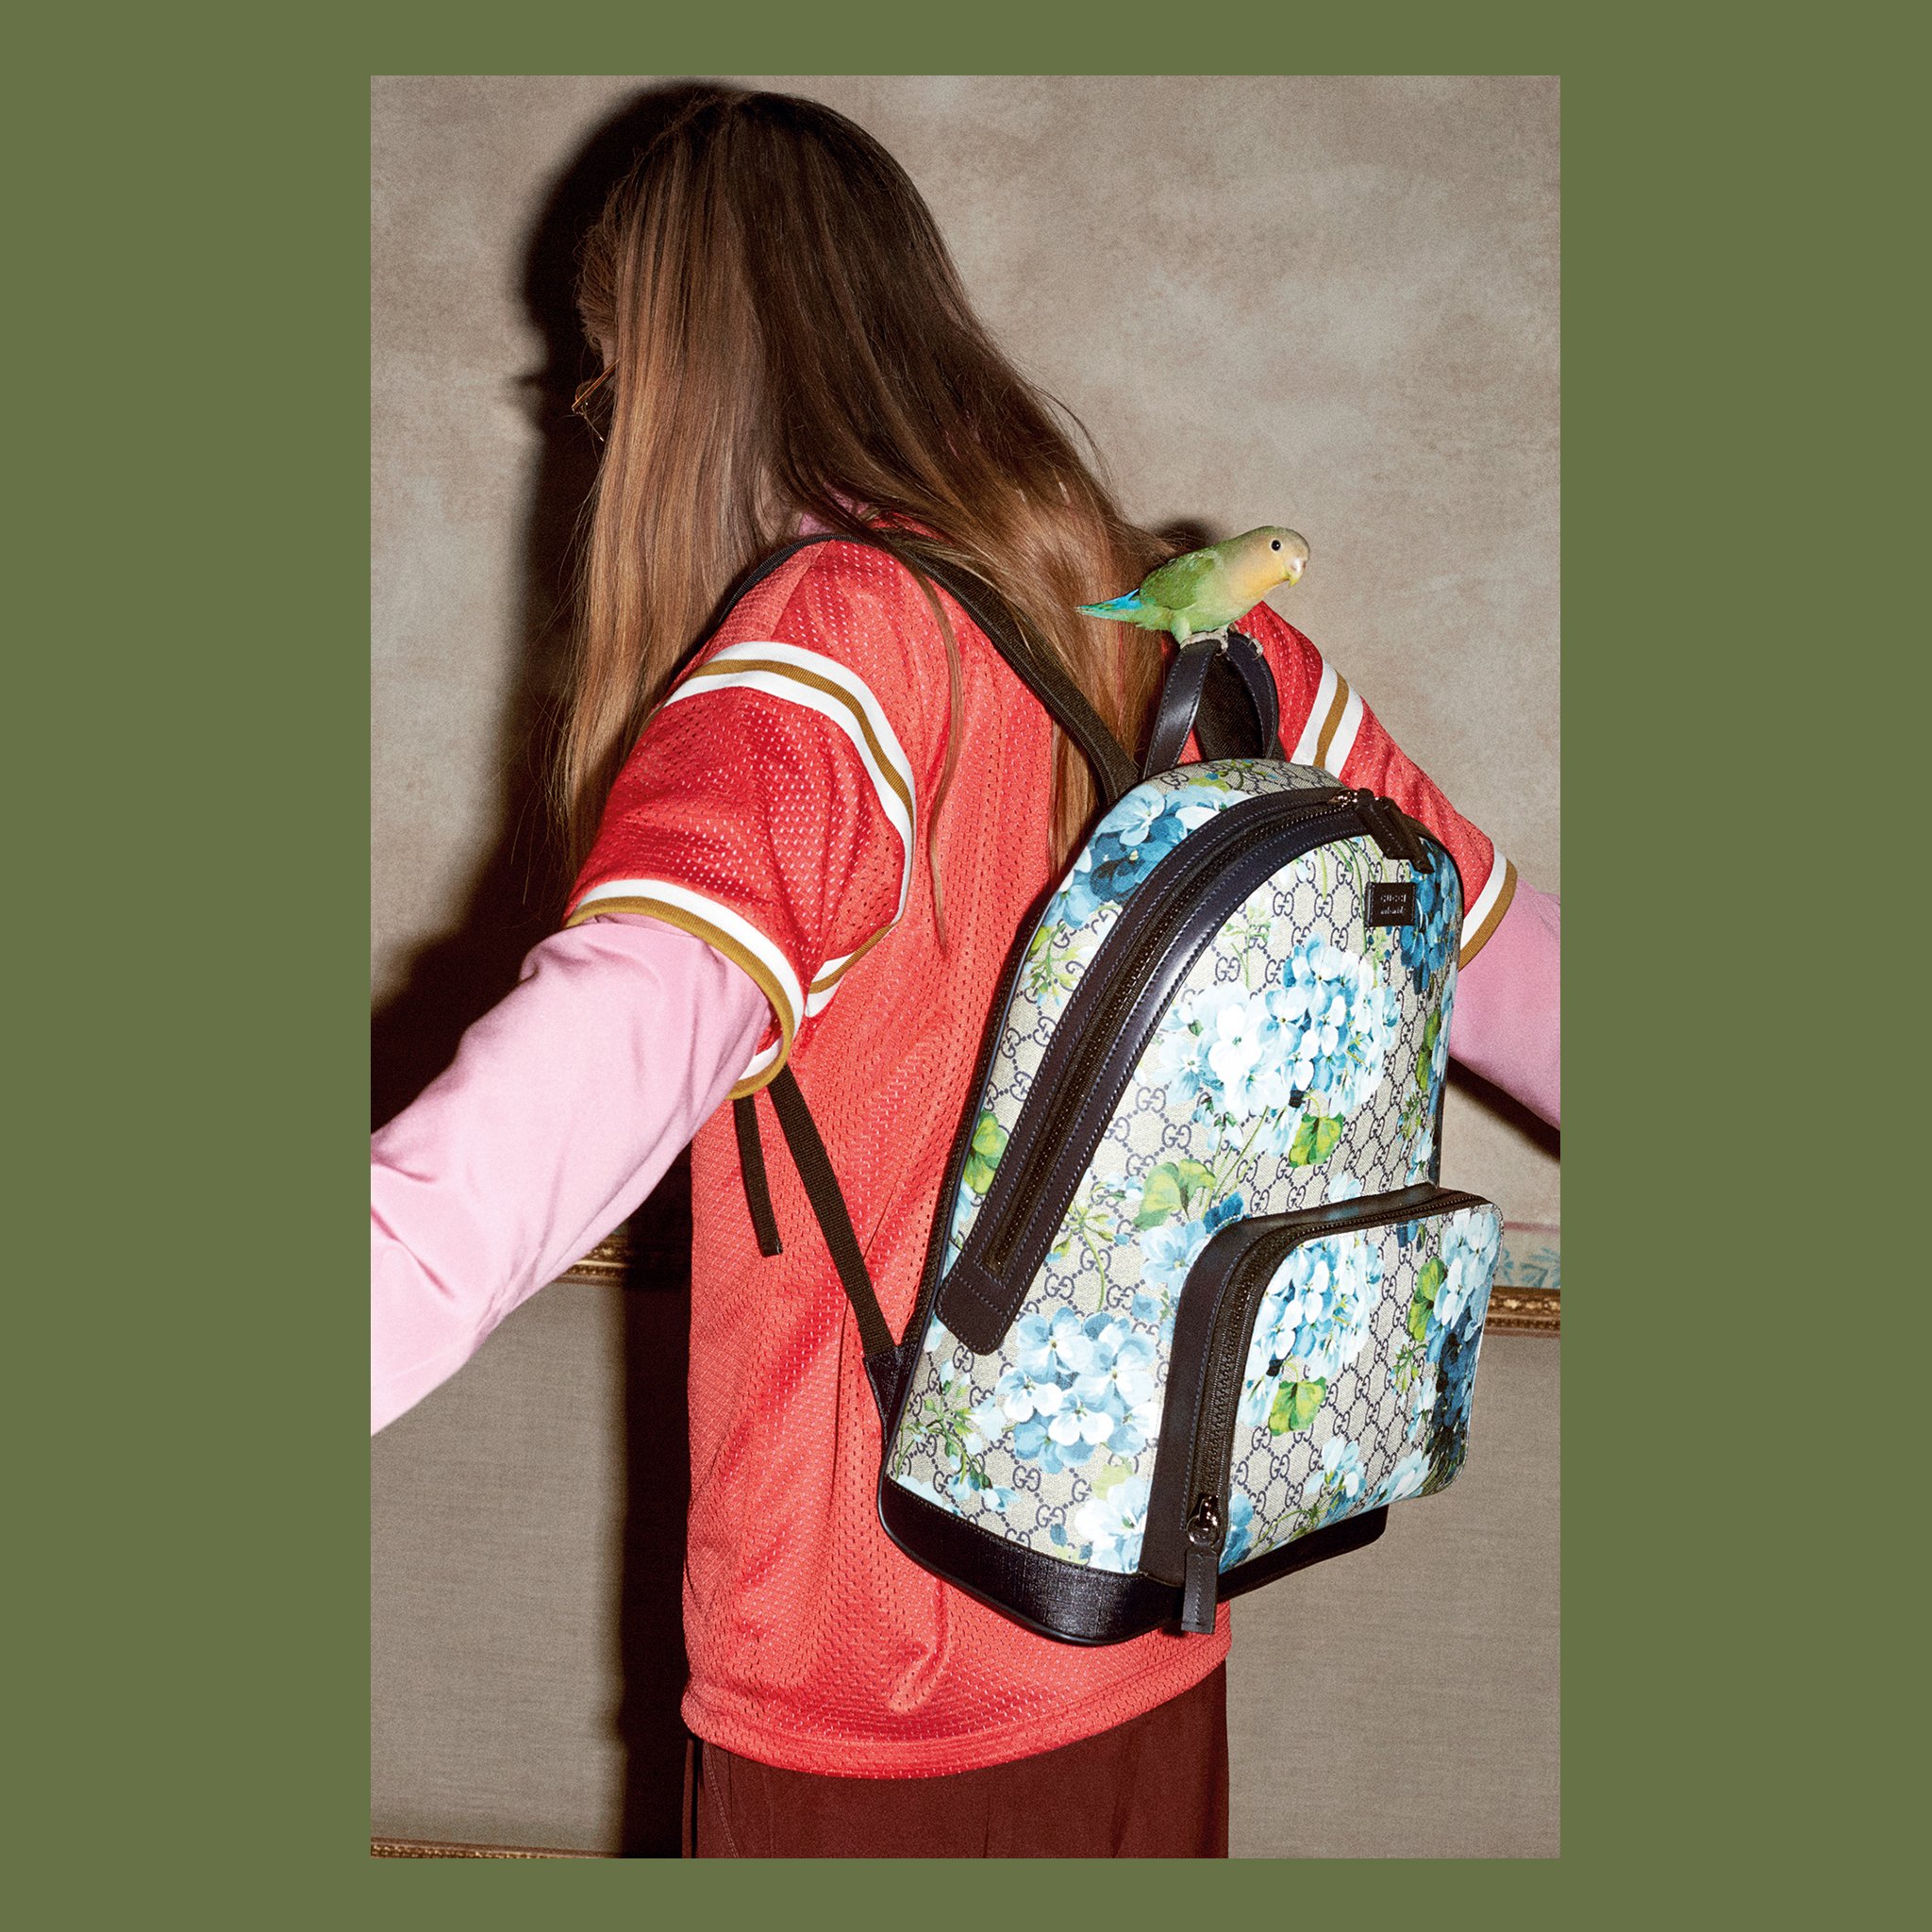 gucci backpack with blue flowers